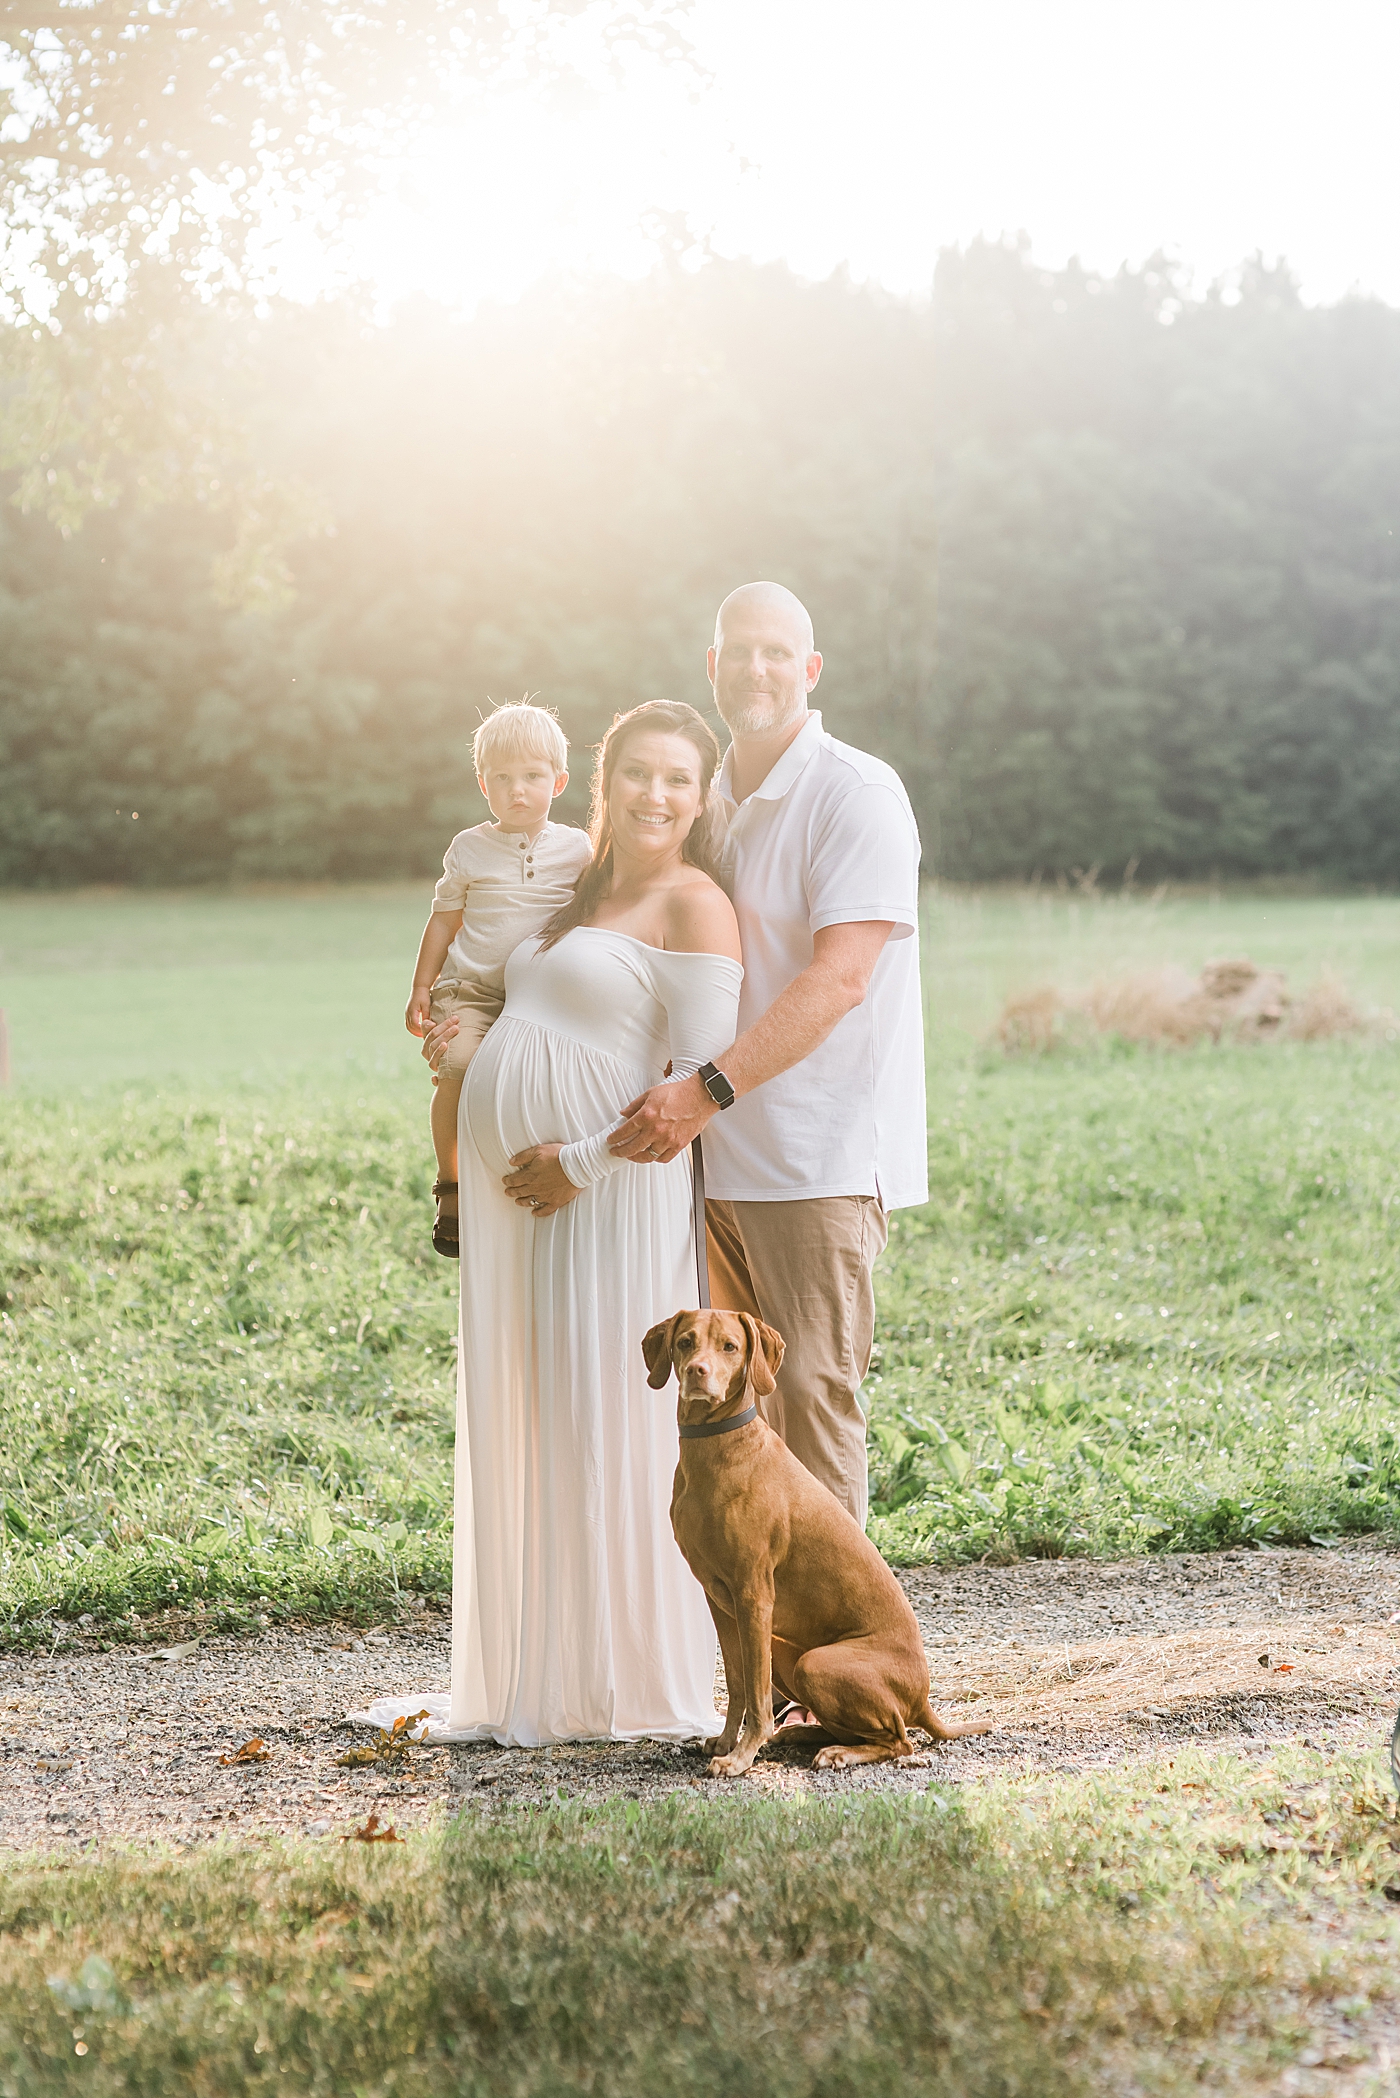 Mom, dad, and little boy with their dog | Photo by Anna Wisjo Photography